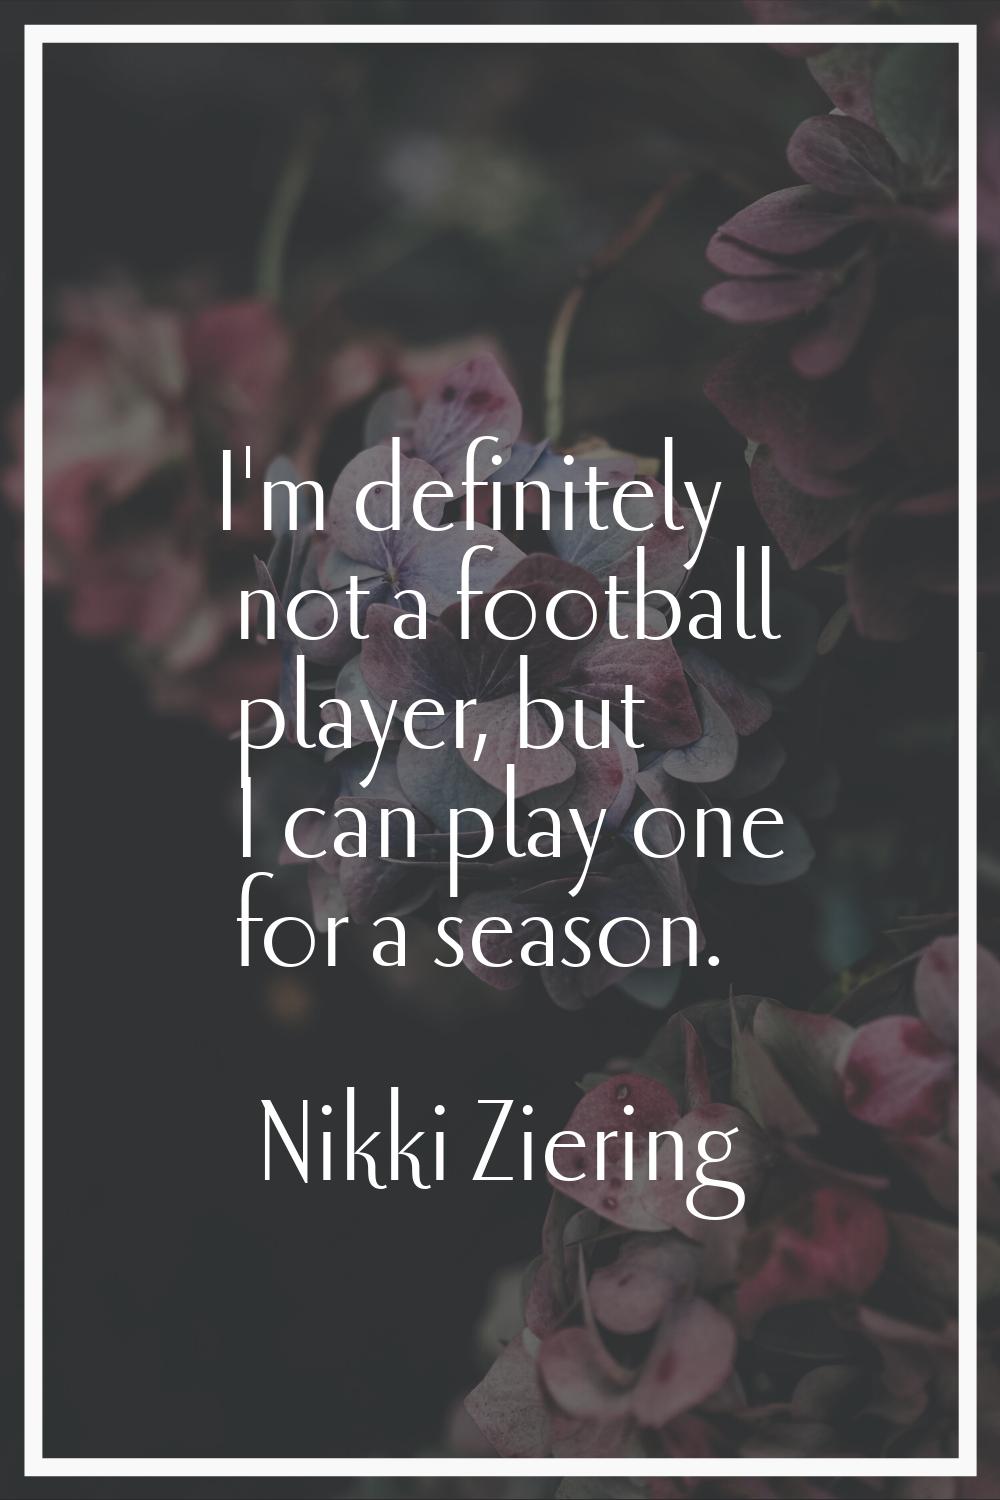 I'm definitely not a football player, but I can play one for a season.